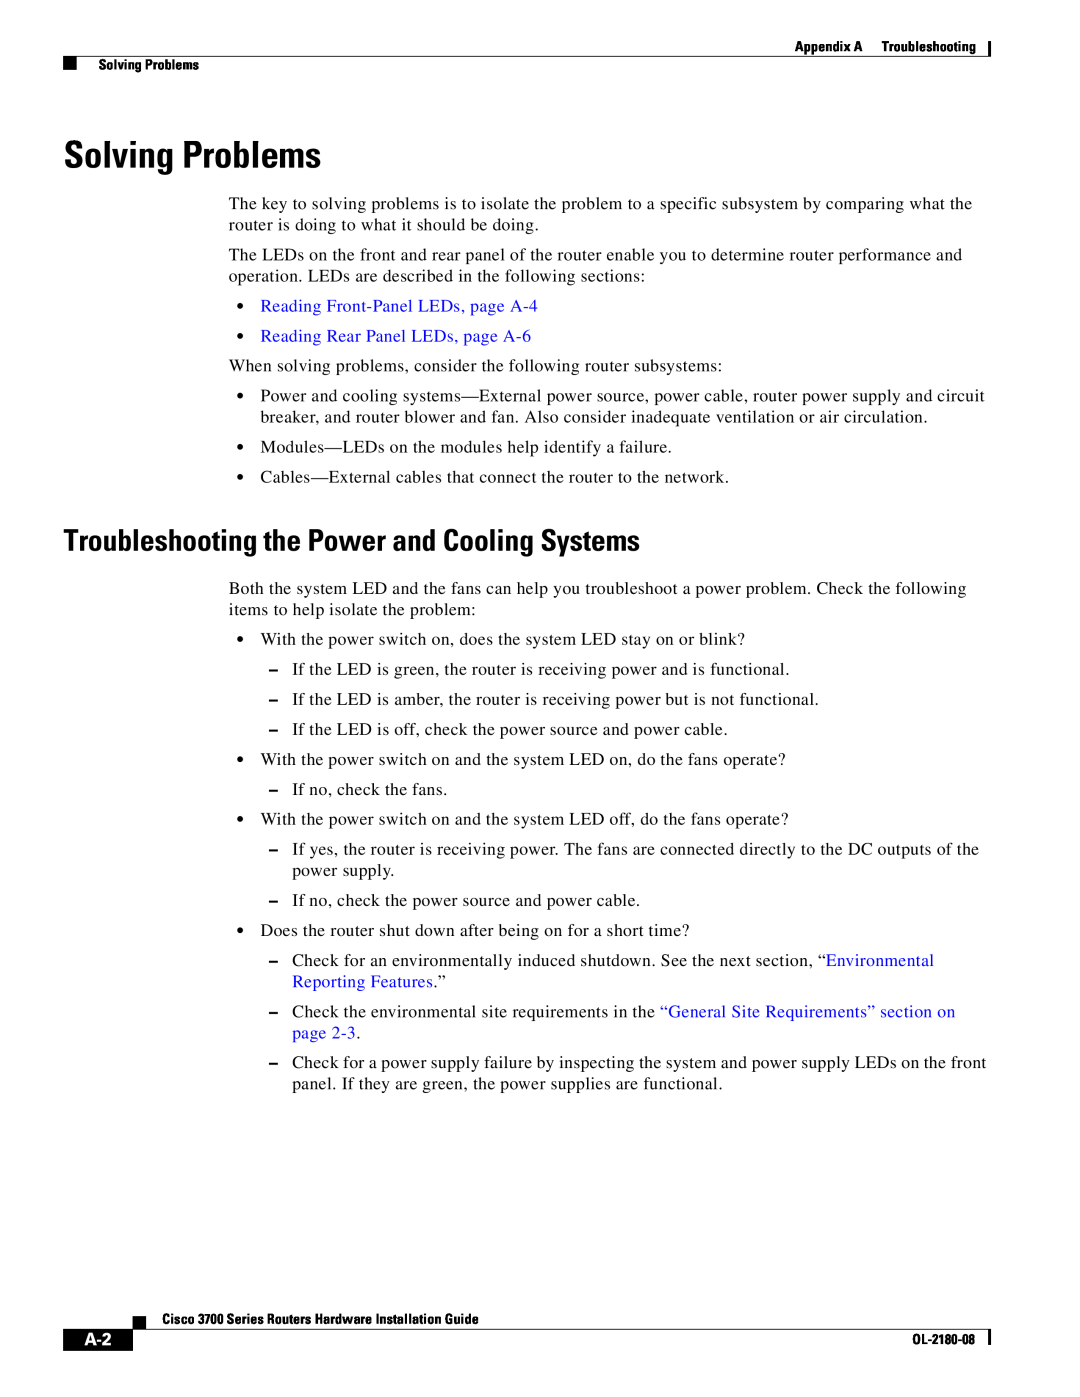 Cisco Systems 3700 Series manual Solving Problems, Troubleshooting the Power and Cooling Systems 